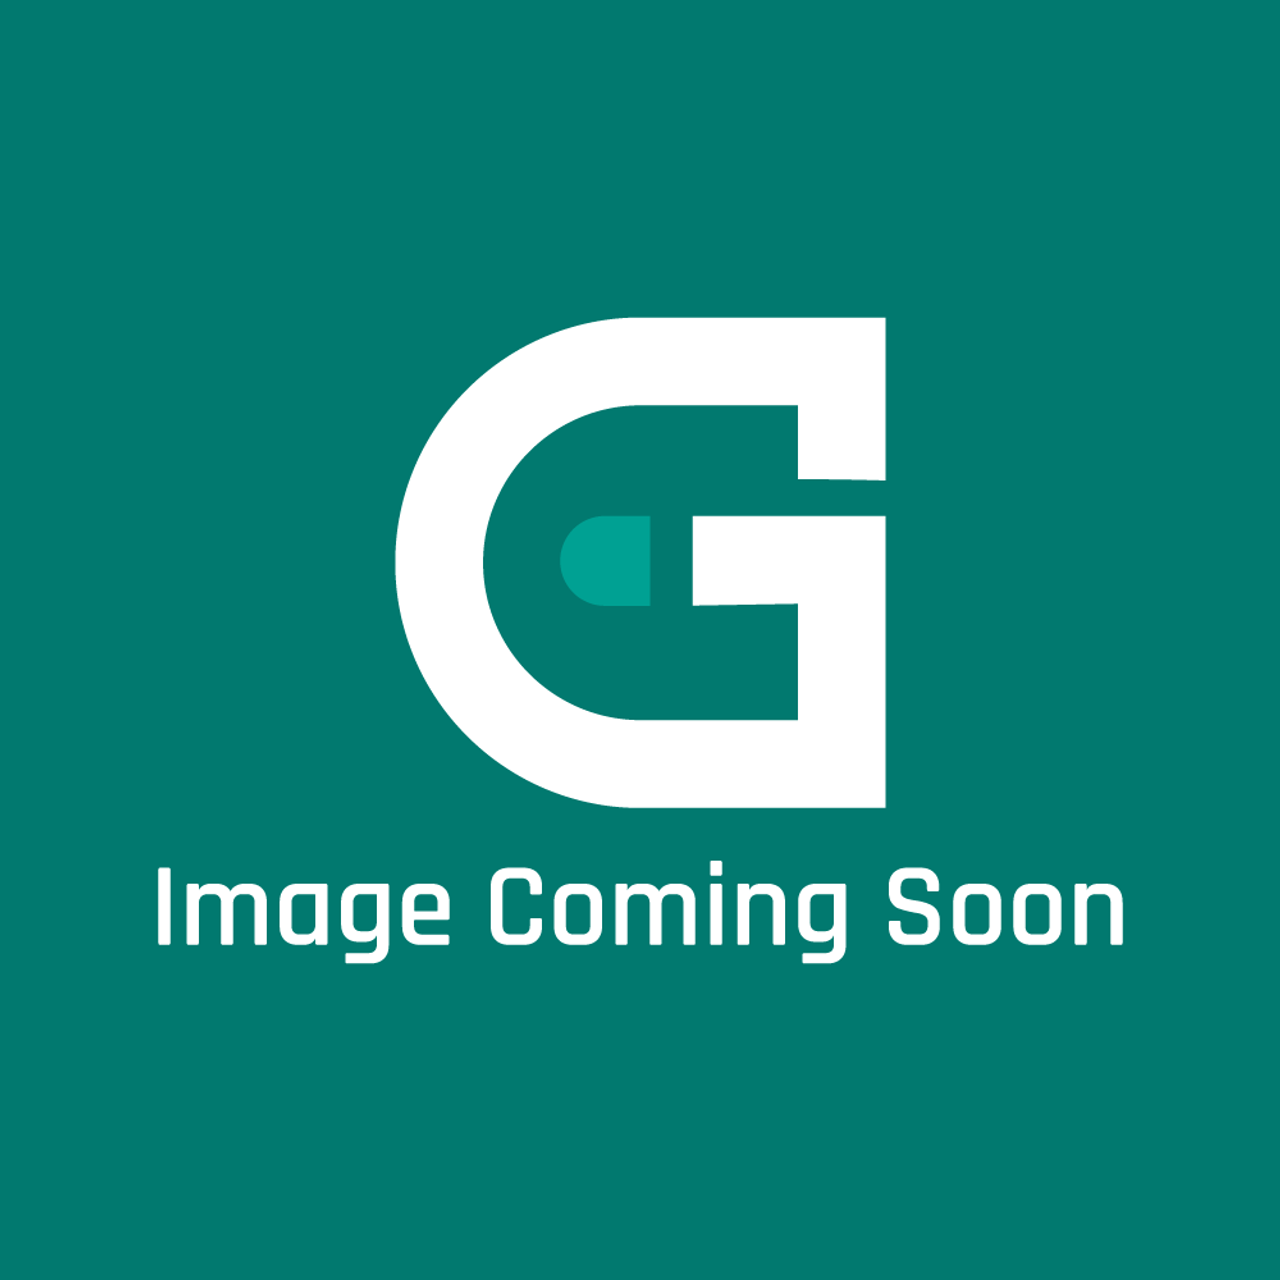 AGA Marvel R2714 - Front Flue Plate Assy Opj - Image Coming Soon!